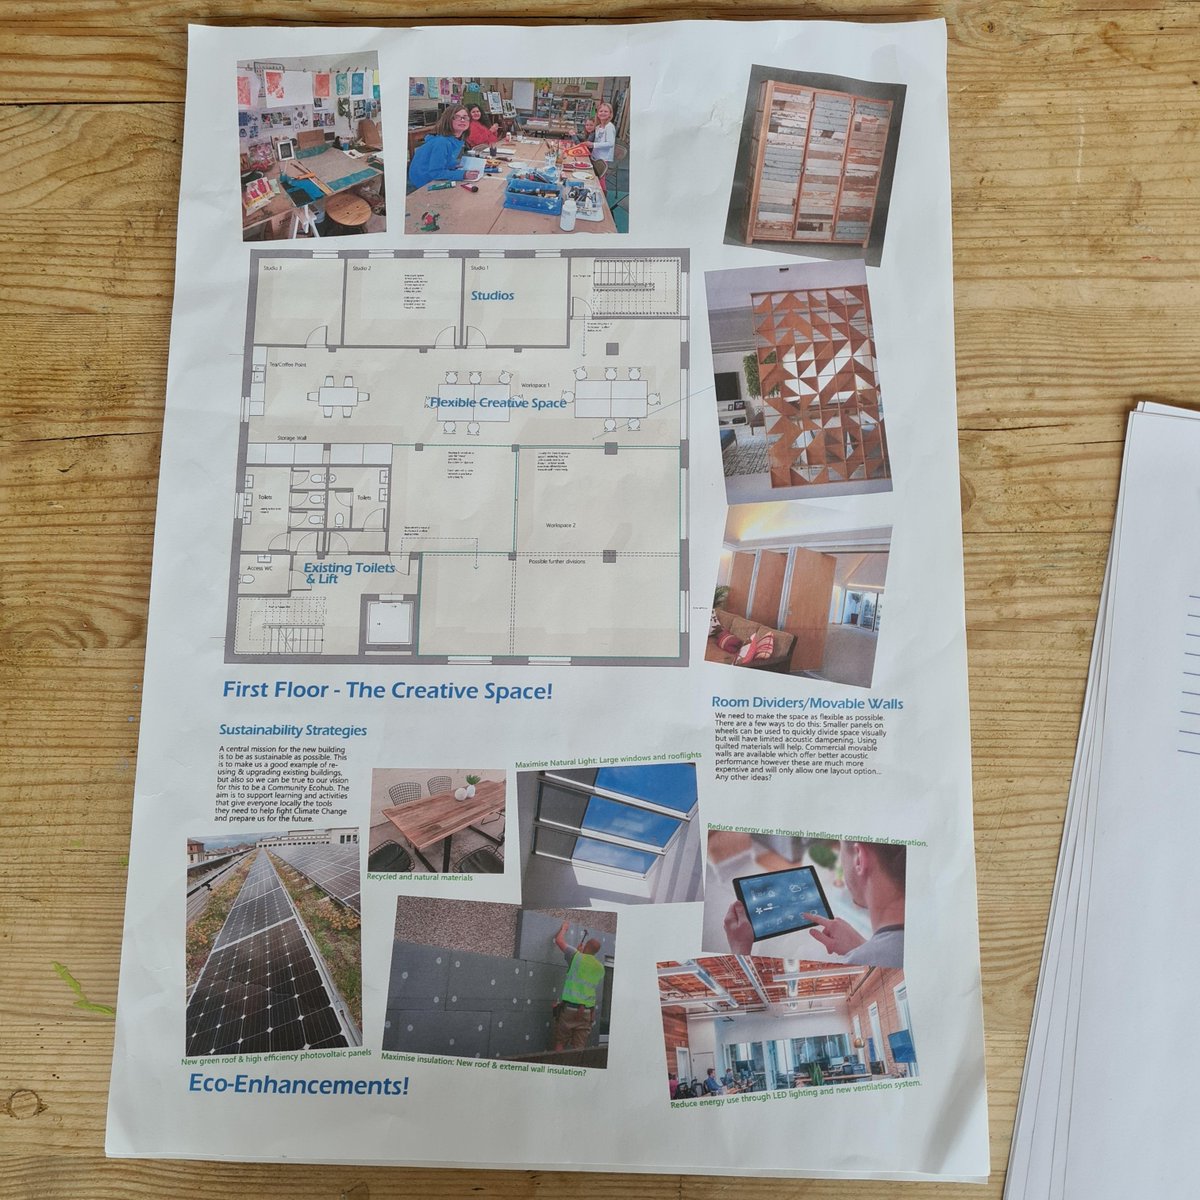 I'm very pleased to share with you the draft plans for the building refurbishment, which has been made possible by grants from @localtrust, @communityownershipfund, @coopfoundation, @northoftyneca and others. Let us know what you think:
ow.ly/Fr9o50IfXzO